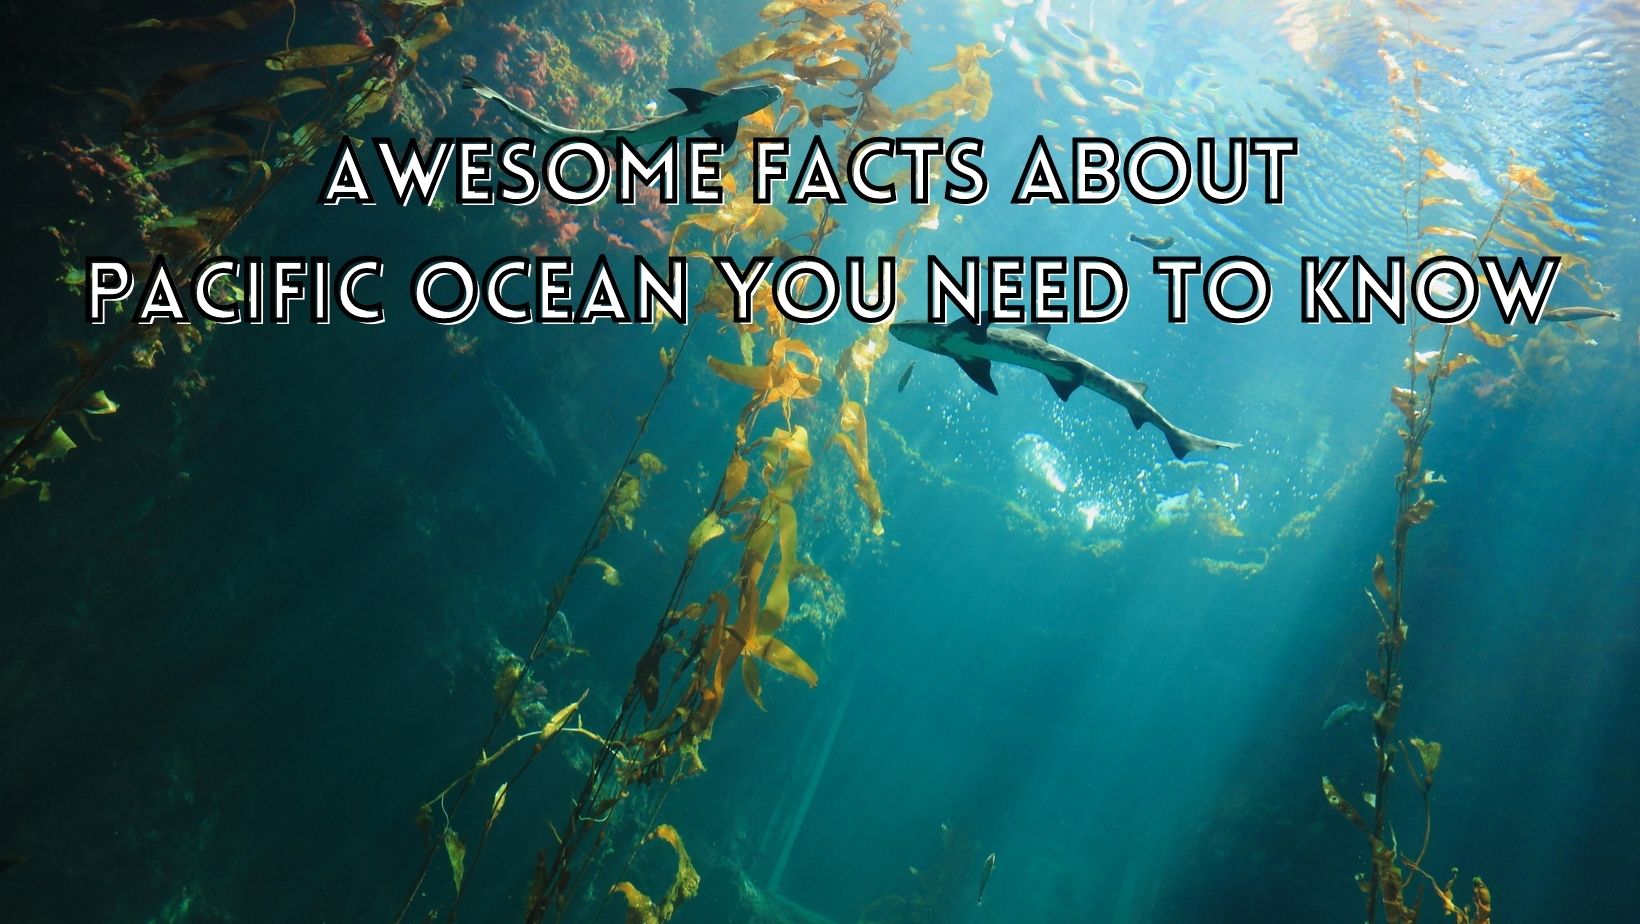 Pacific ocean facts